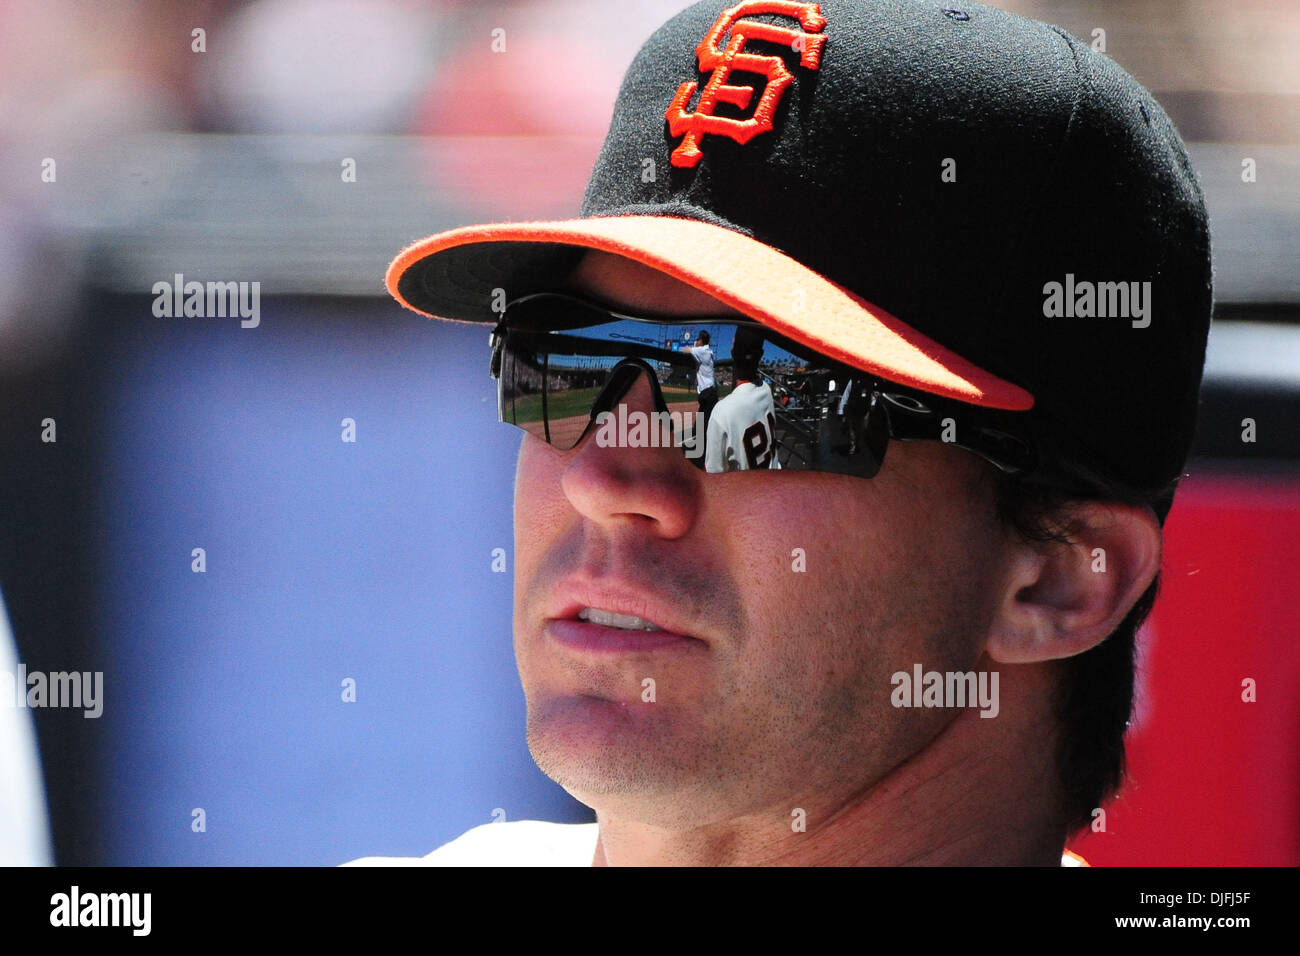 San Francisco, CA: San Francisco Giants pitcher Barry Zito (75) watches the game. The Giants won the game 6-2. (Credit Image: © Charles Herskowitz/Southcreek Global/ZUMApress.com) Stock Photo